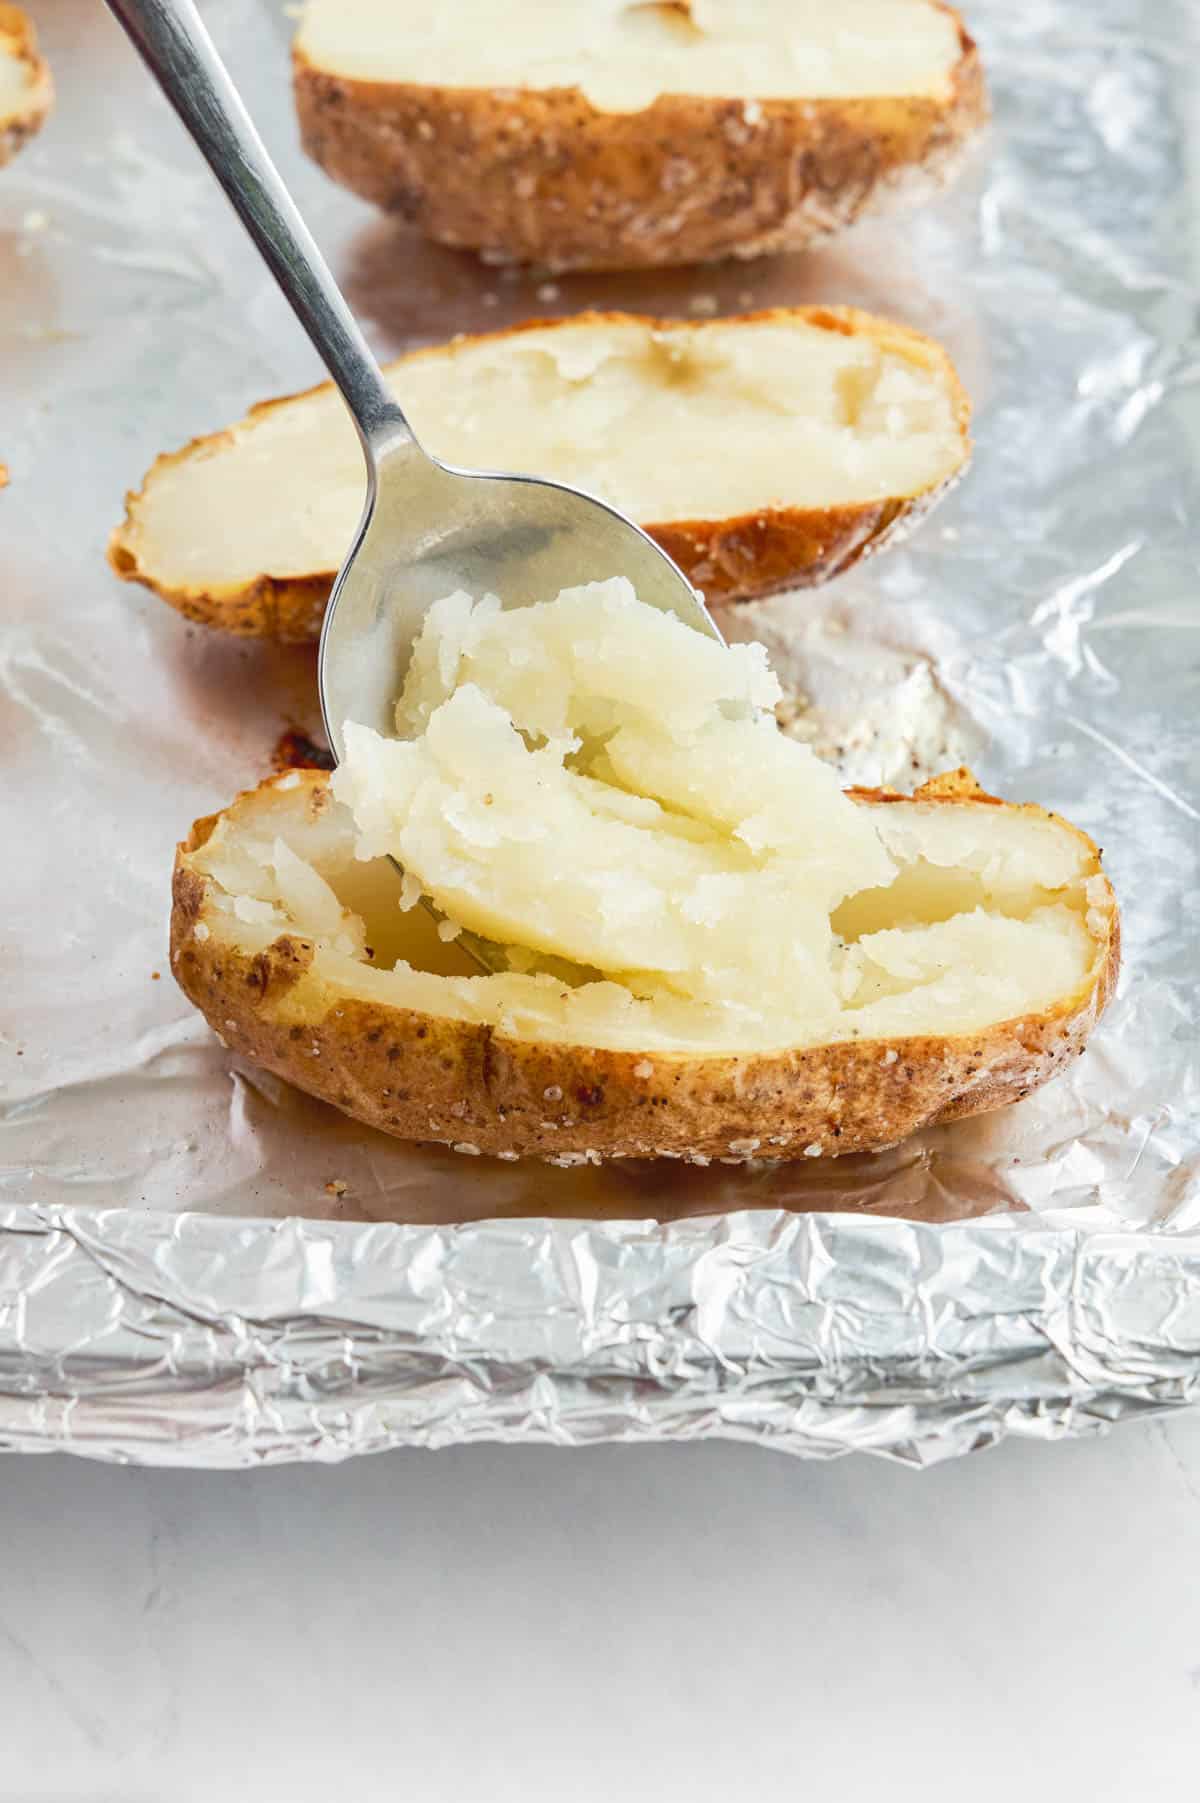 The insides of baked potatoes are scooped out with a spoon.